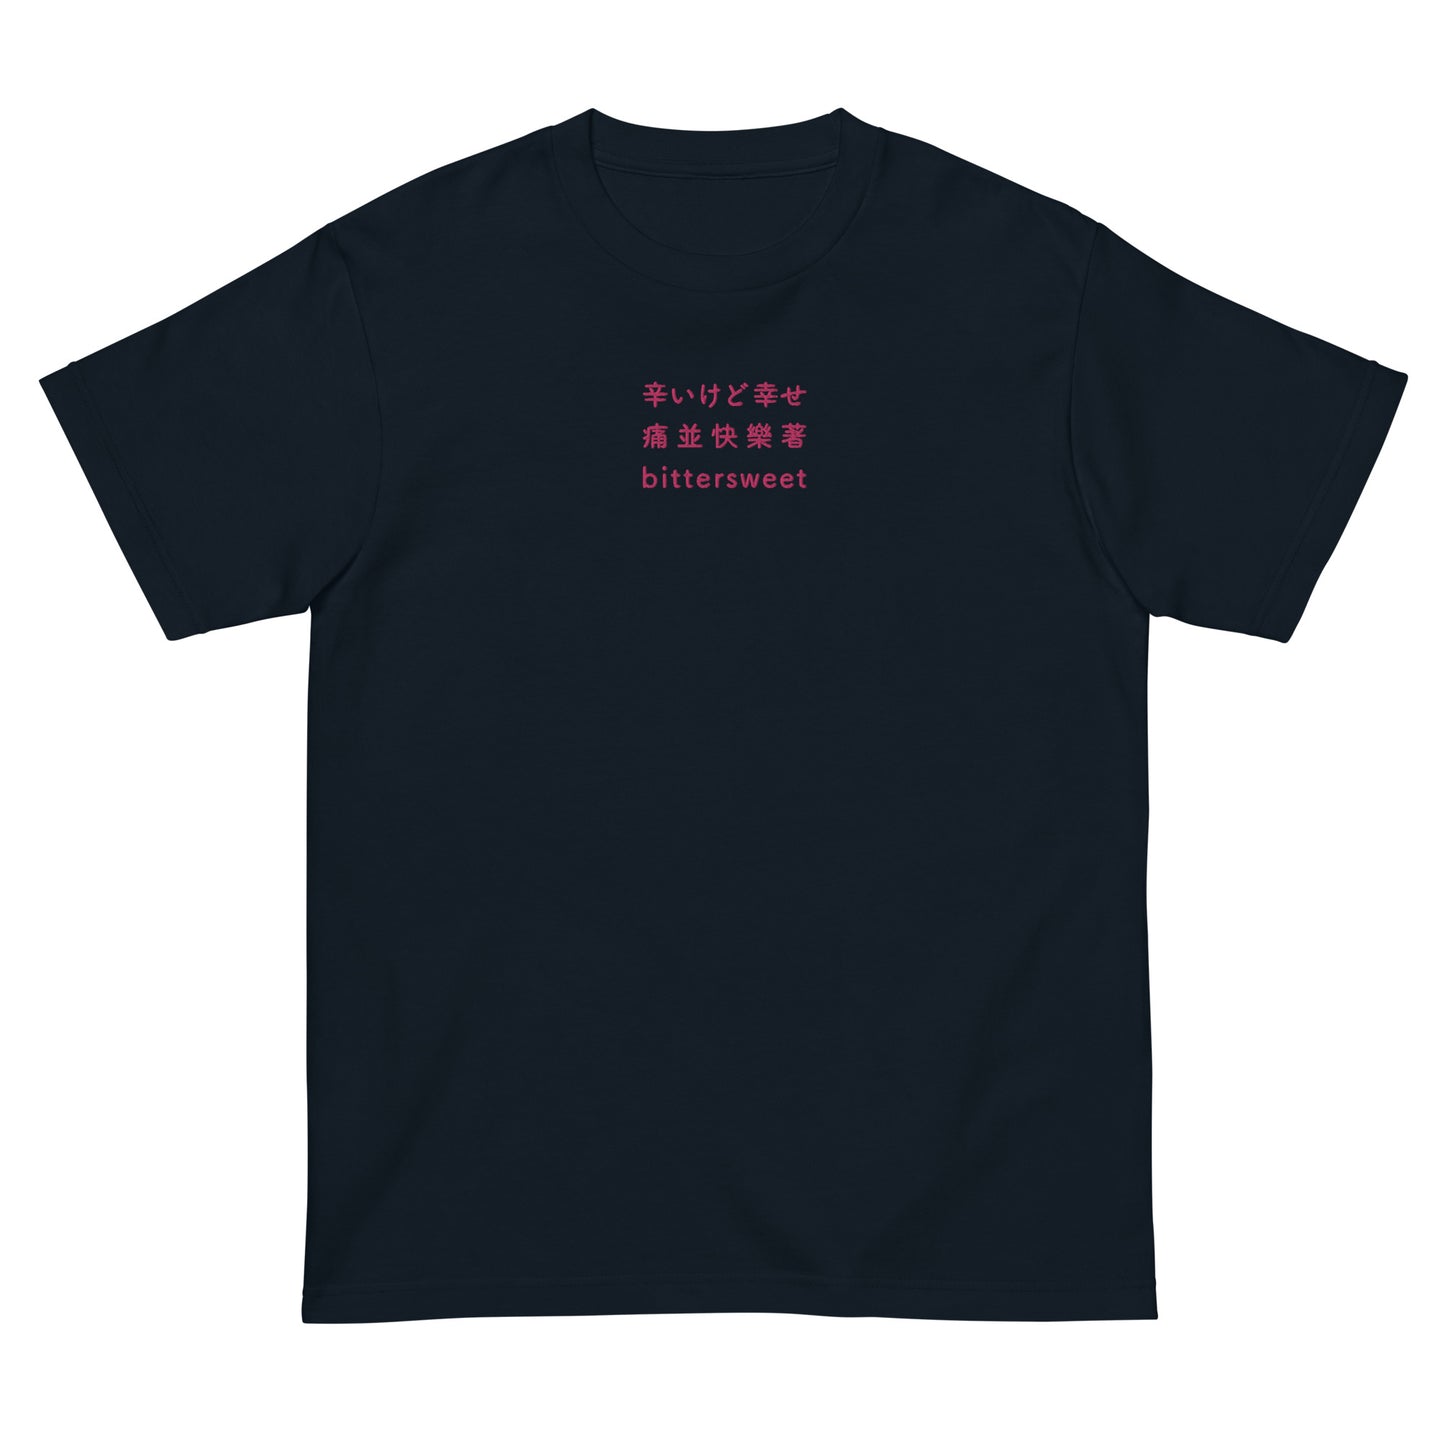 Navy High Quality Tee - Front Design with an Pink Embroidery "Bittersweet" in Japanese,Chinese and English